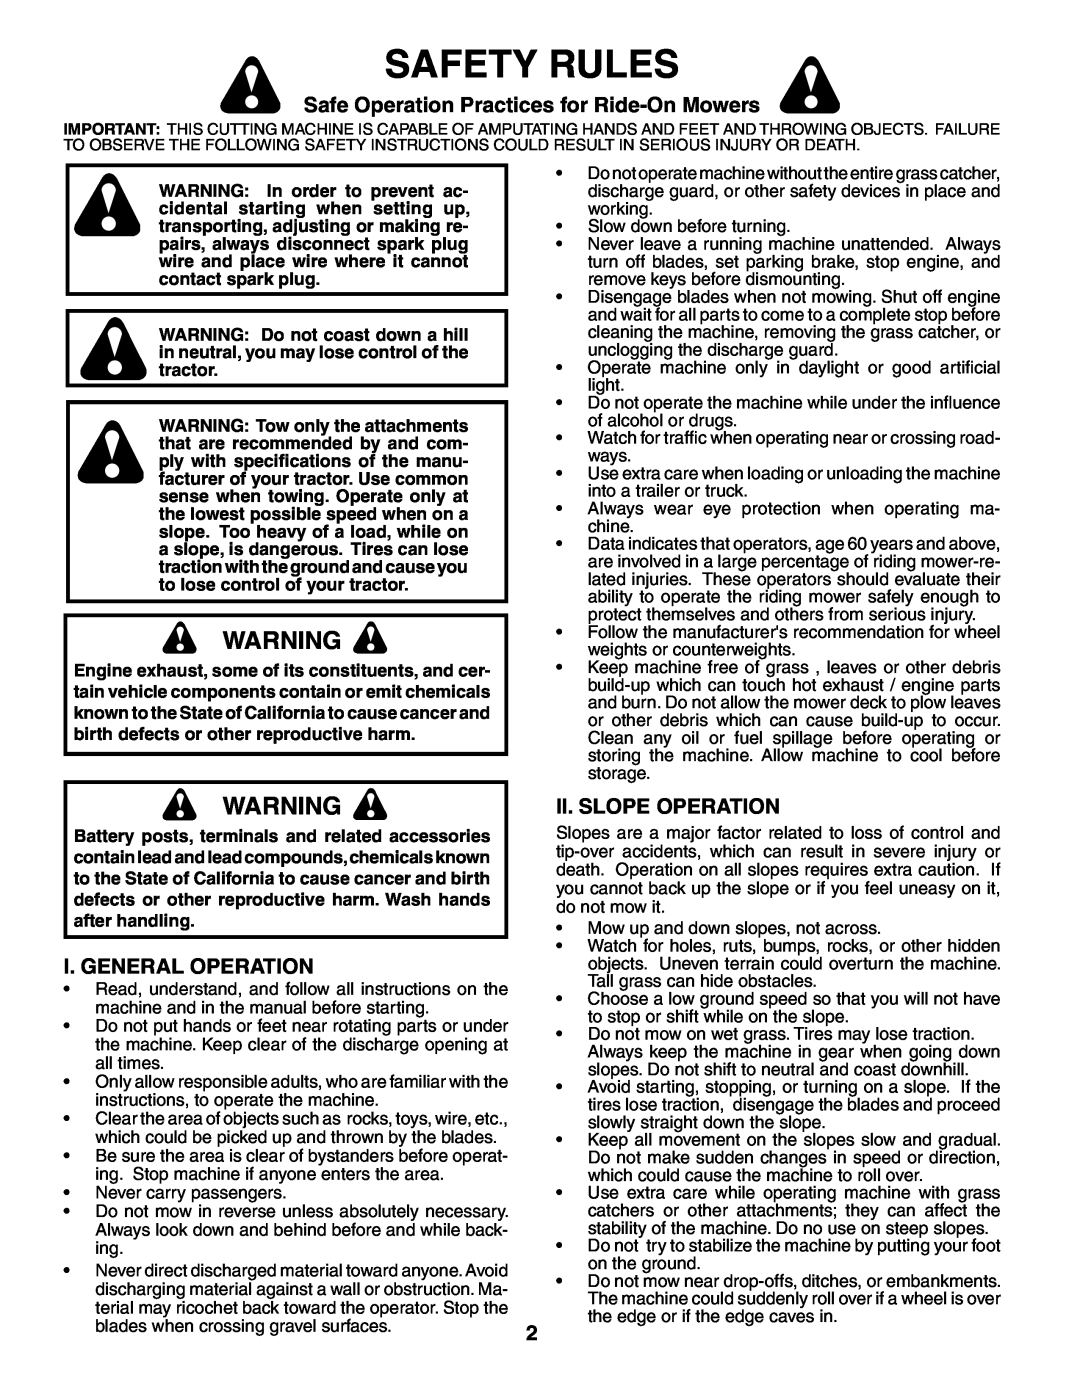 Poulan DB24H48YT Safety Rules, Safe Operation Practices for Ride-On Mowers, I. General Operation, Ii. Slope Operation 